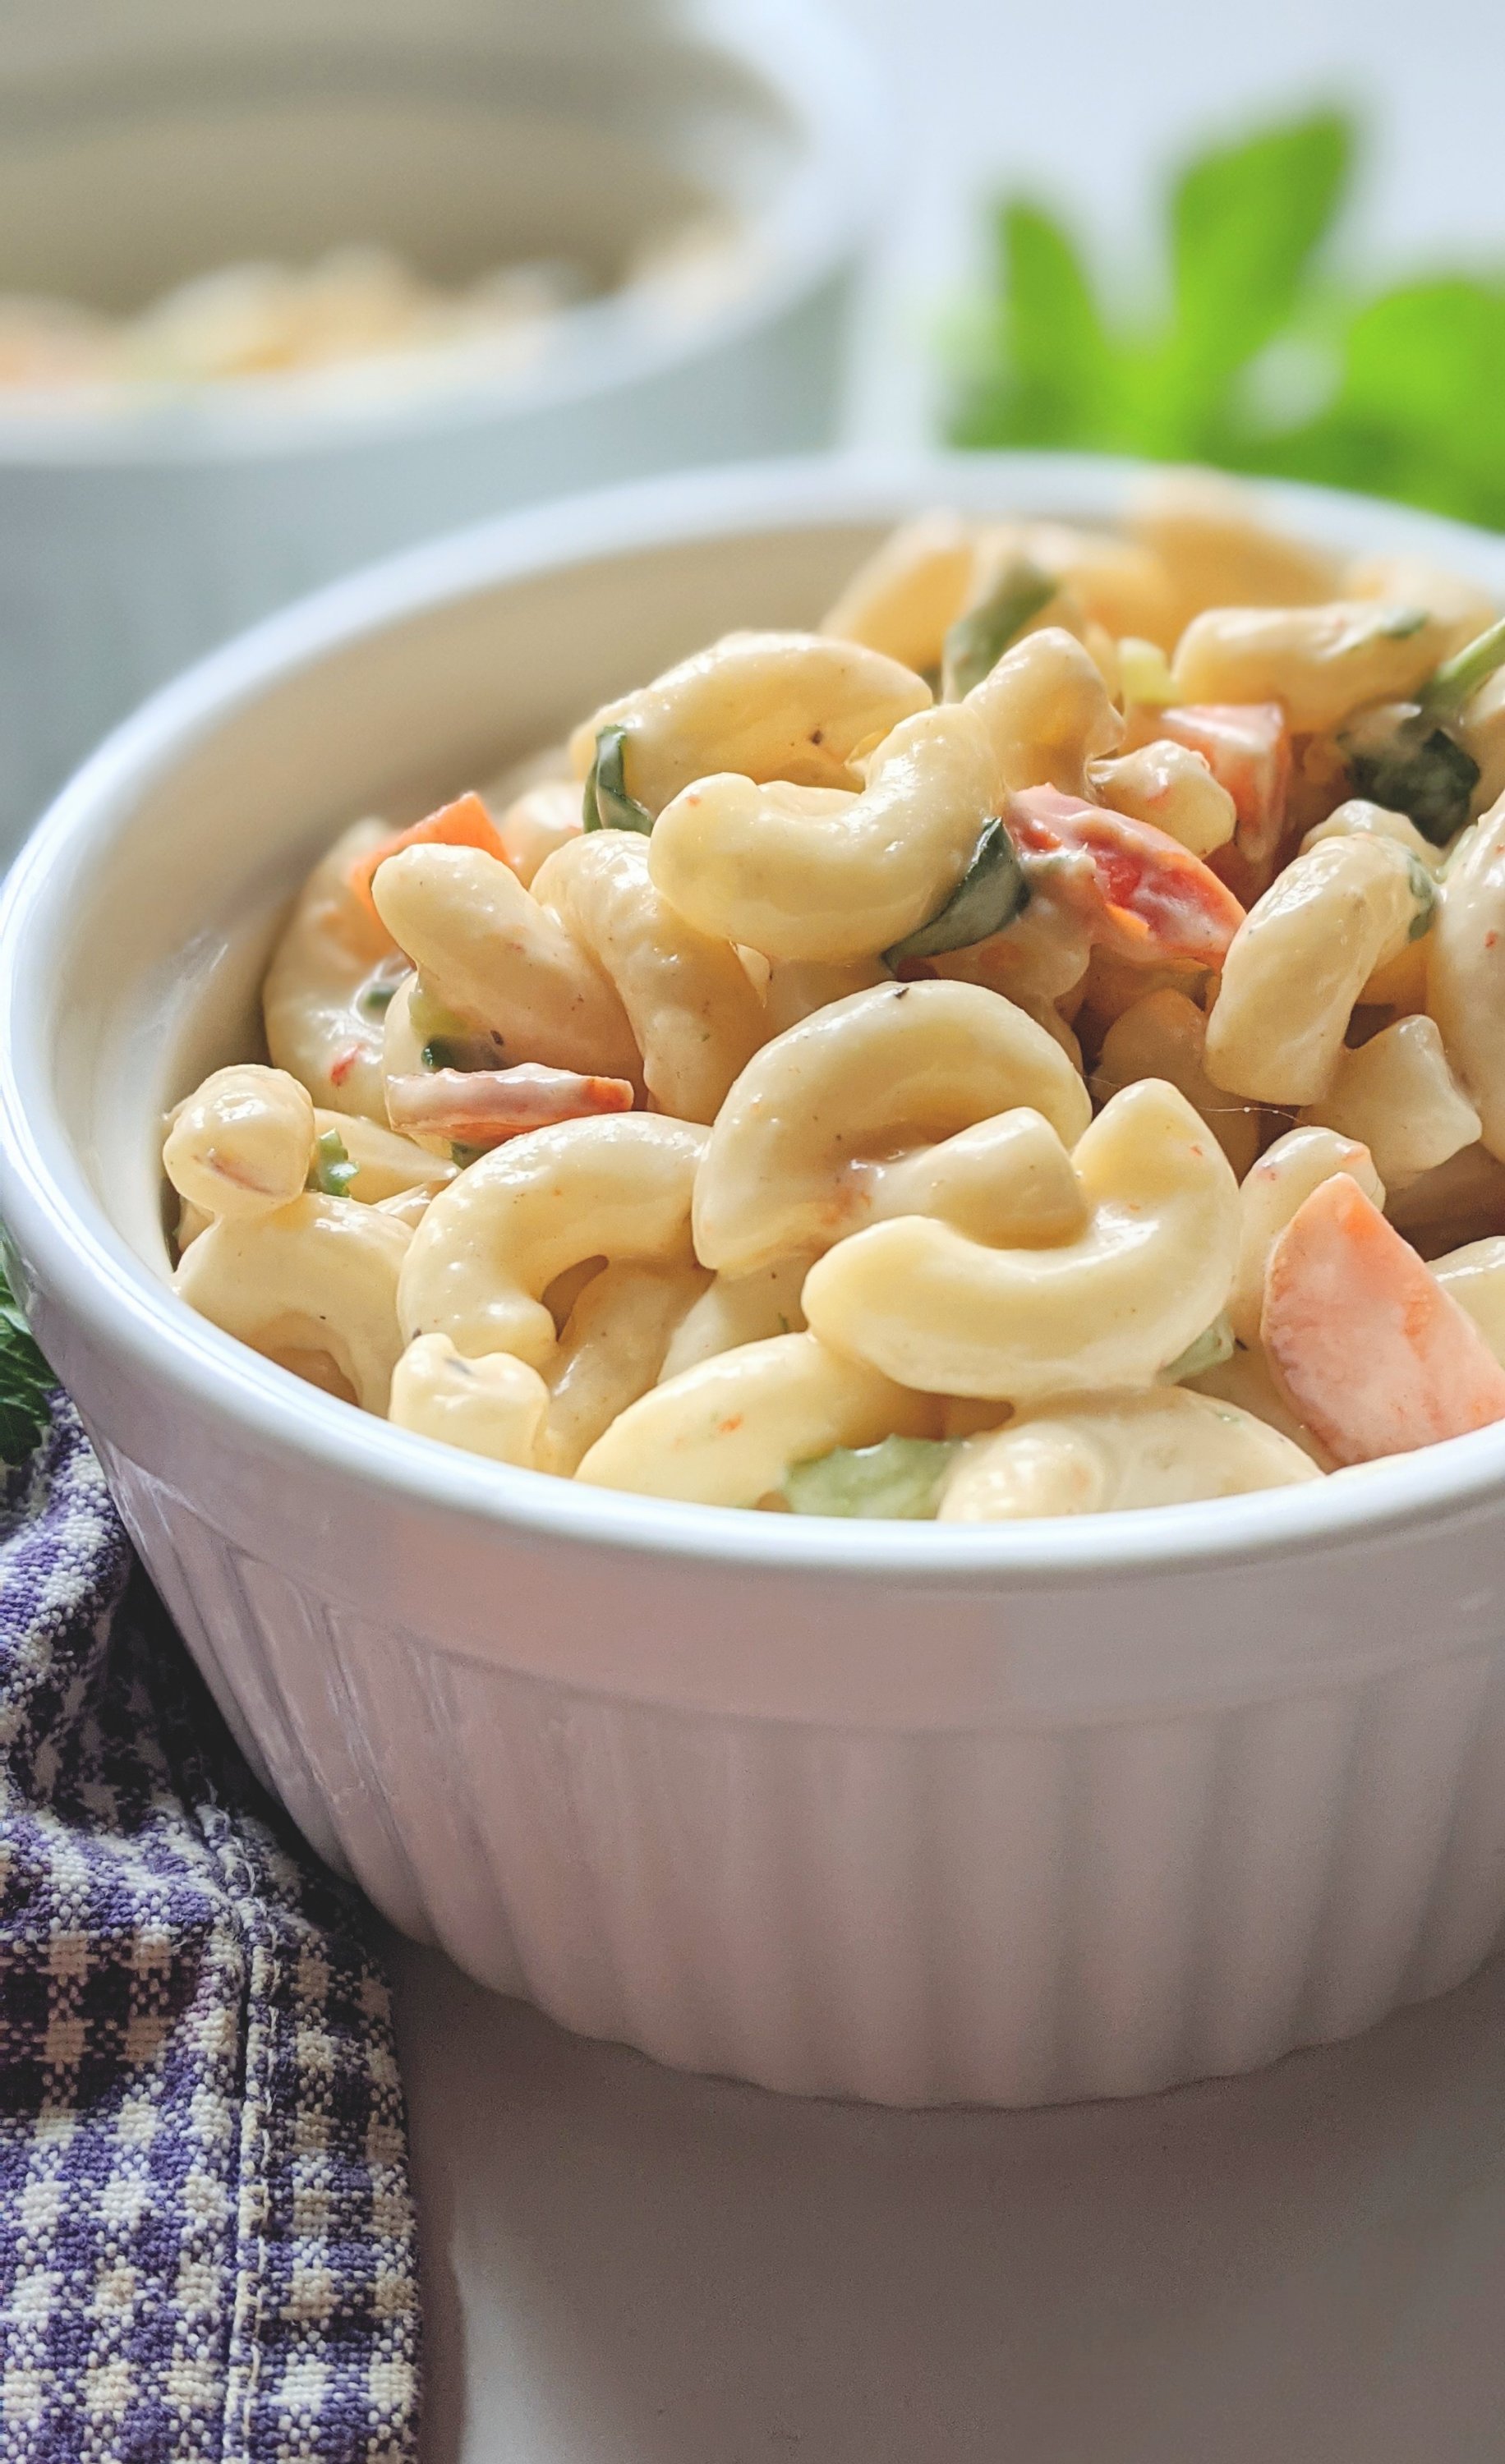 gluten free cooked dressing macaroni salad recipe traditional gluten free recipes for parties entertaining pot lucks bbqs simple gluten free macaroni salad side dishes everyone will love